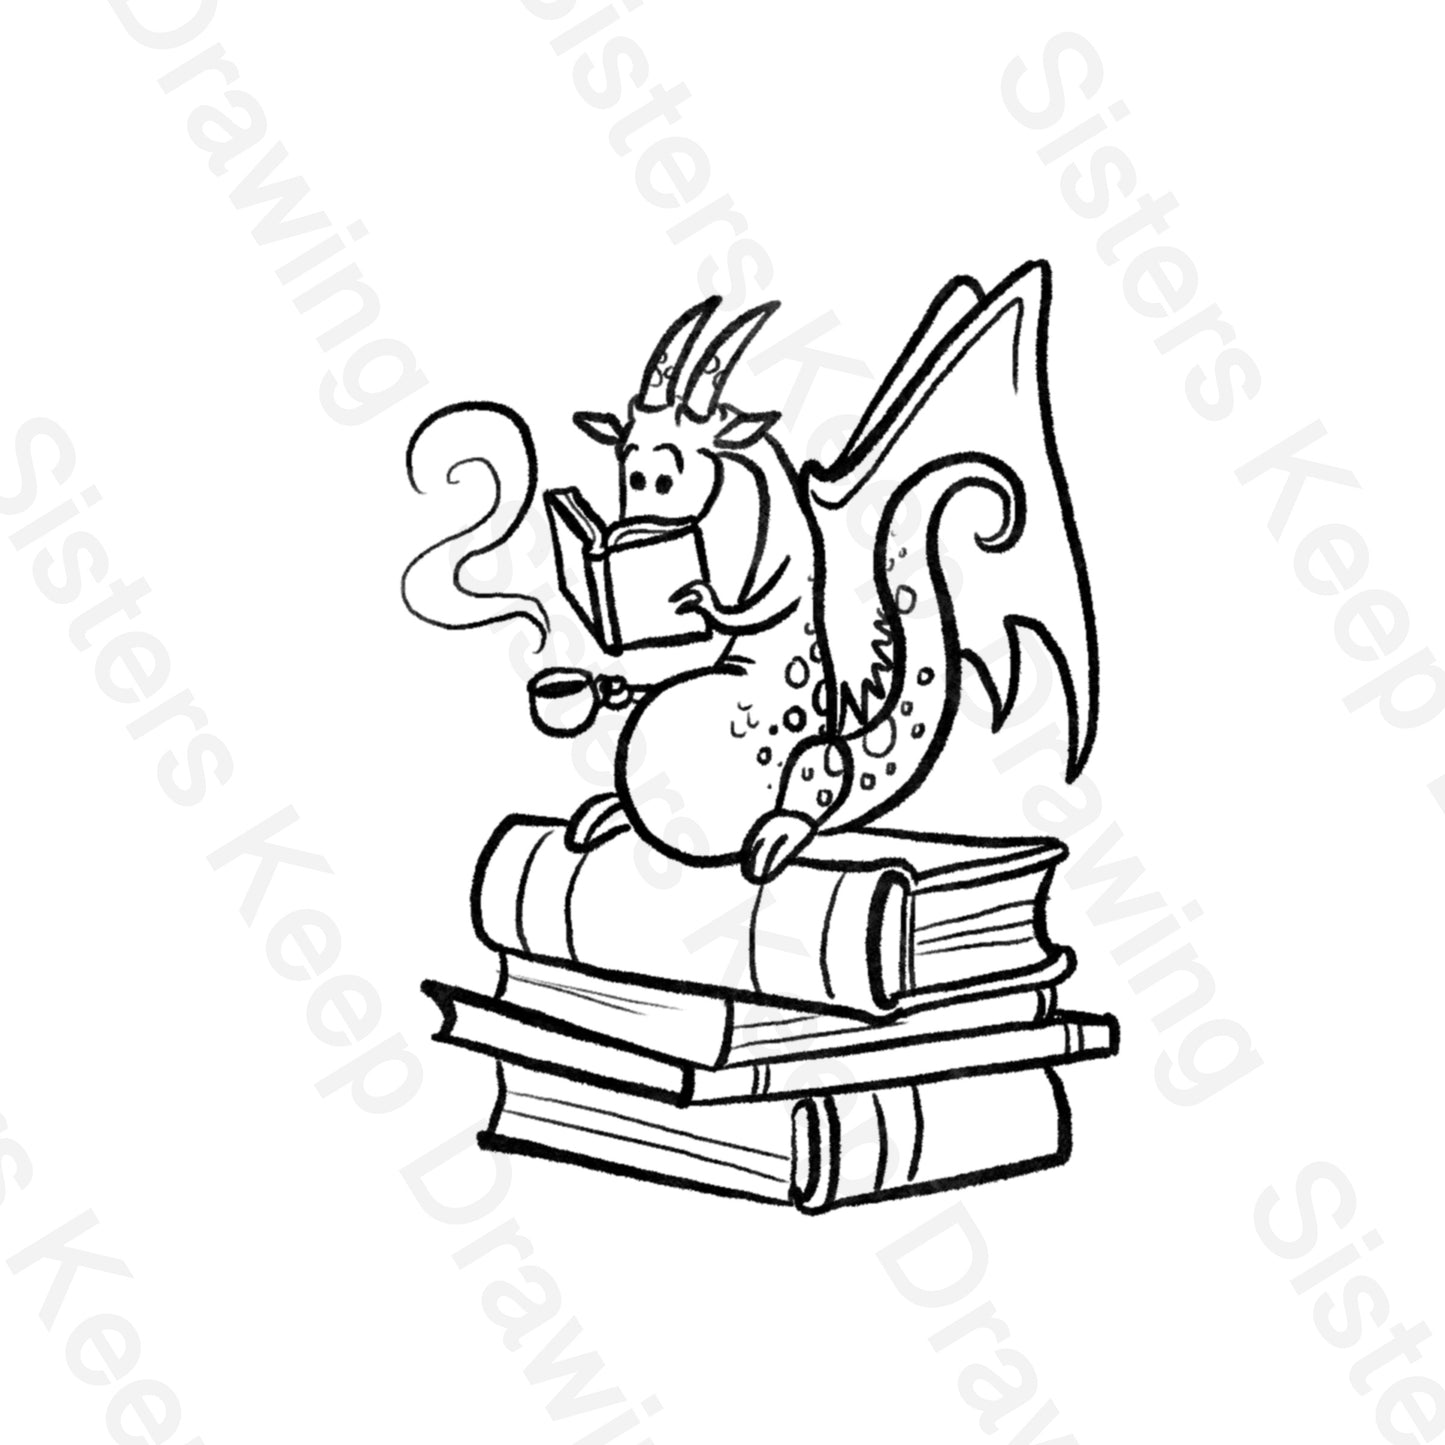 Tiny Dragon With Books - Tattoo Transparent Permission PNG- instant download digital printable artwork